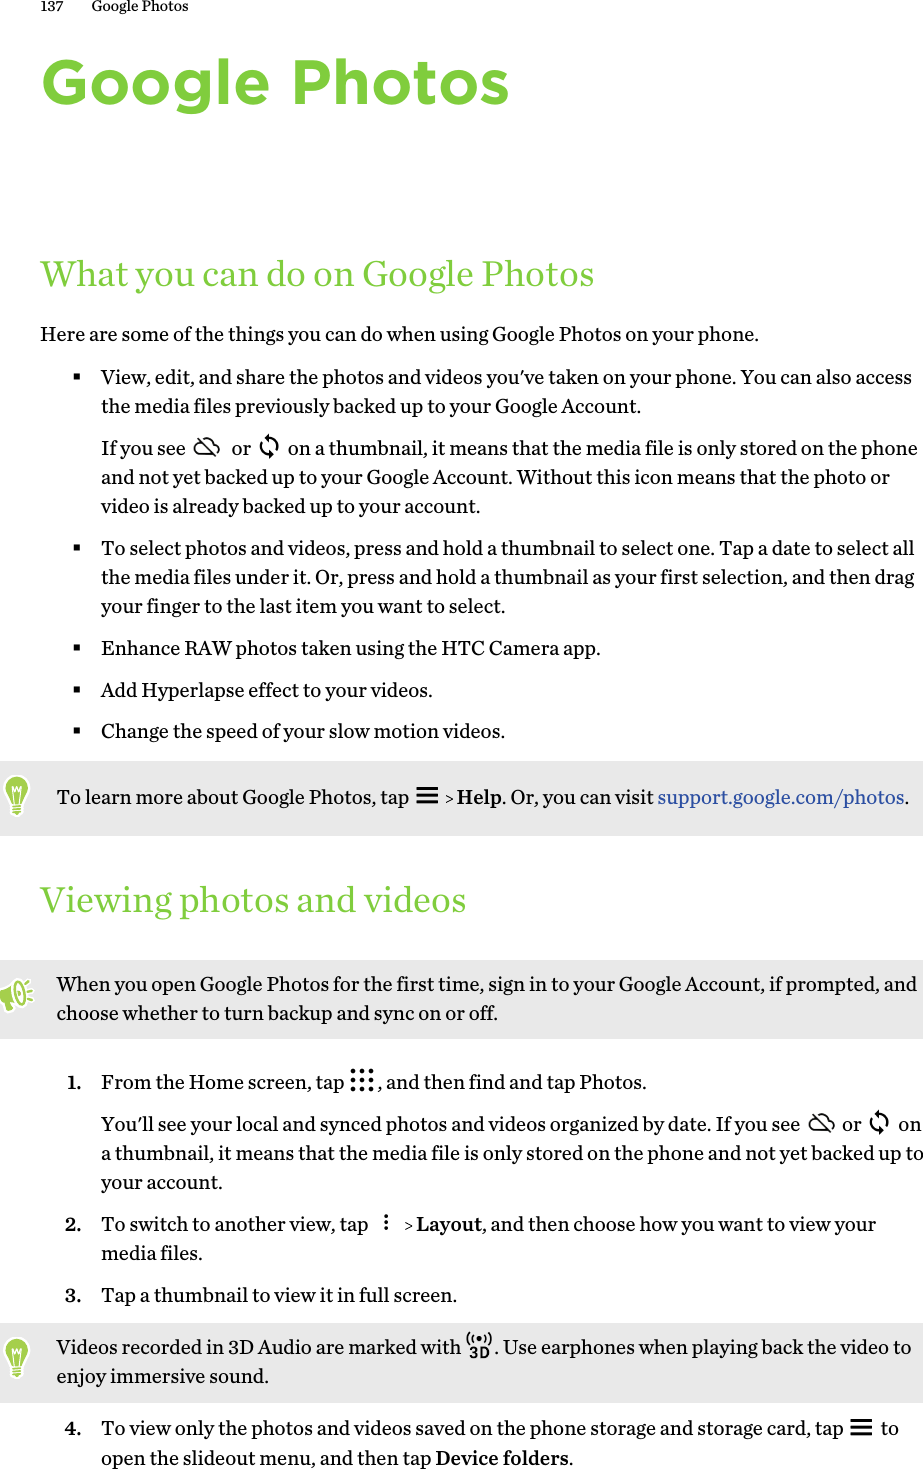 Google PhotosWhat you can do on Google PhotosHere are some of the things you can do when using Google Photos on your phone.§View, edit, and share the photos and videos you&apos;ve taken on your phone. You can also accessthe media files previously backed up to your Google Account.If you see   or   on a thumbnail, it means that the media file is only stored on the phoneand not yet backed up to your Google Account. Without this icon means that the photo orvideo is already backed up to your account.§To select photos and videos, press and hold a thumbnail to select one. Tap a date to select allthe media files under it. Or, press and hold a thumbnail as your first selection, and then dragyour finger to the last item you want to select.§Enhance RAW photos taken using the HTC Camera app.§Add Hyperlapse effect to your videos.§Change the speed of your slow motion videos.To learn more about Google Photos, tap     Help. Or, you can visit support.google.com/photos.Viewing photos and videosWhen you open Google Photos for the first time, sign in to your Google Account, if prompted, andchoose whether to turn backup and sync on or off.1. From the Home screen, tap  , and then find and tap Photos. You&apos;ll see your local and synced photos and videos organized by date. If you see  or   ona thumbnail, it means that the media file is only stored on the phone and not yet backed up toyour account.2. To switch to another view, tap     Layout, and then choose how you want to view yourmedia files.3. Tap a thumbnail to view it in full screen. Videos recorded in 3D Audio are marked with  . Use earphones when playing back the video toenjoy immersive sound.4. To view only the photos and videos saved on the phone storage and storage card, tap   toopen the slideout menu, and then tap Device folders.137 Google Photos